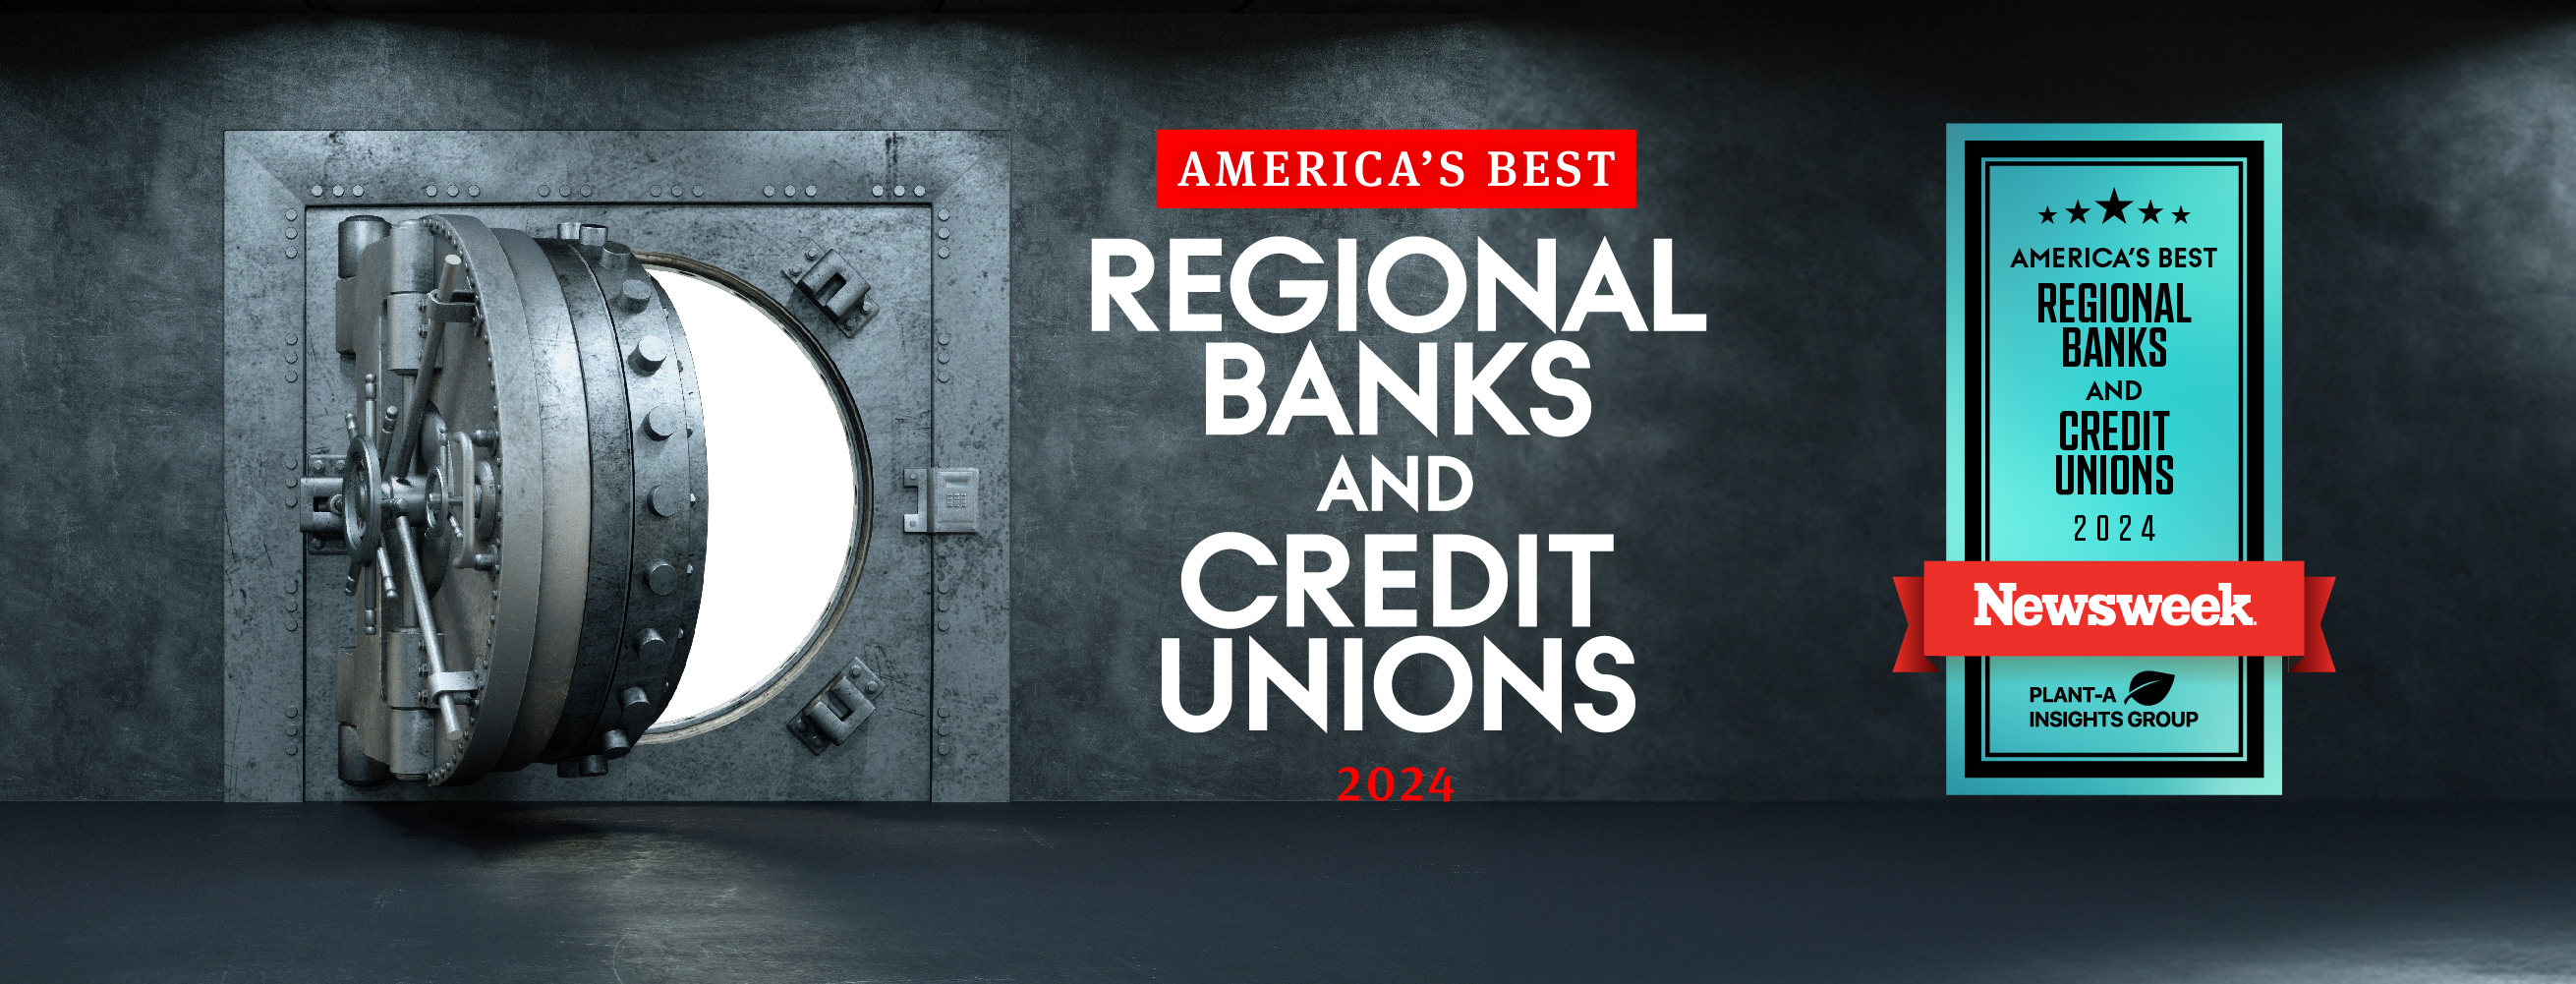 America's Best Regional Banks and Credit Unions 2024 - Newsweek